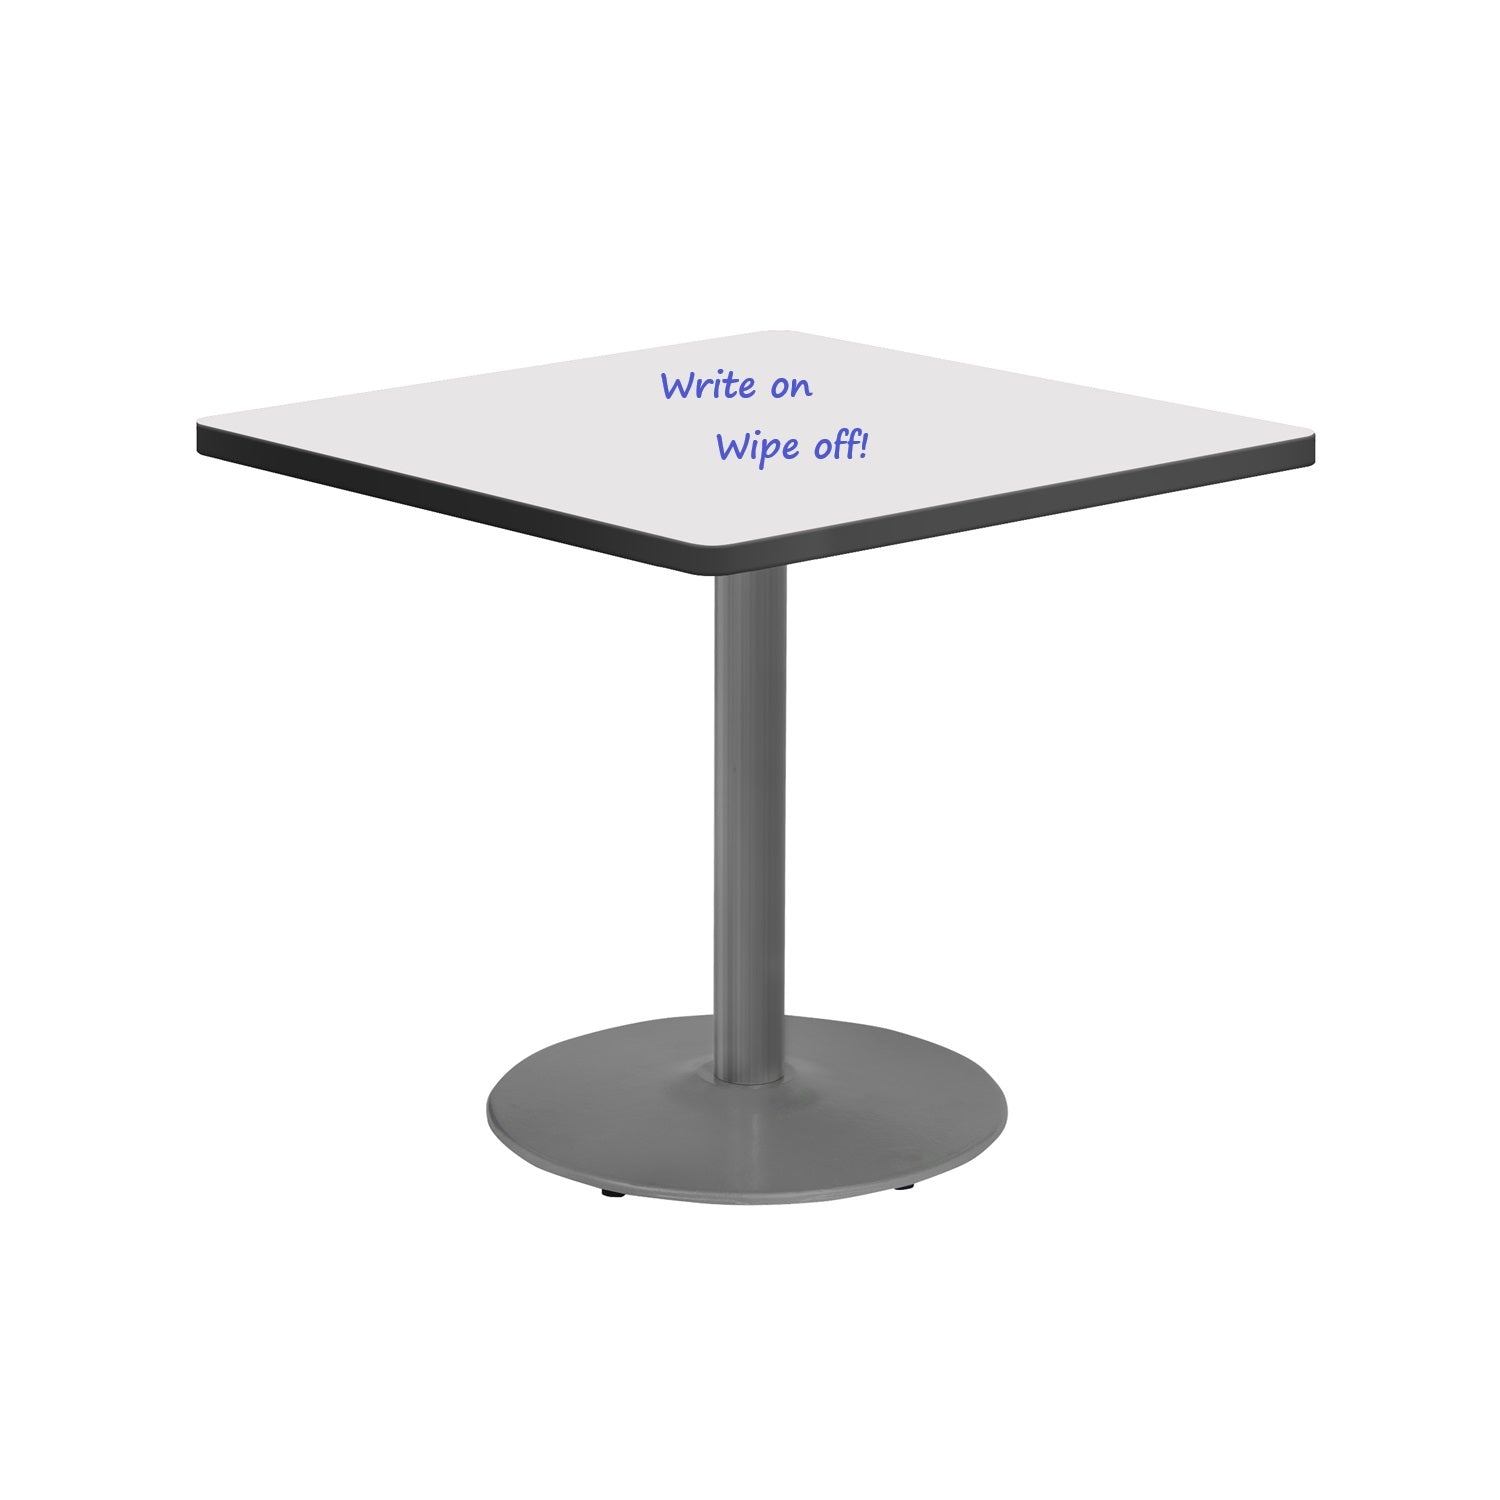 36" Square Sitting Height Café Table with Dry-Erase Whiteboard Top